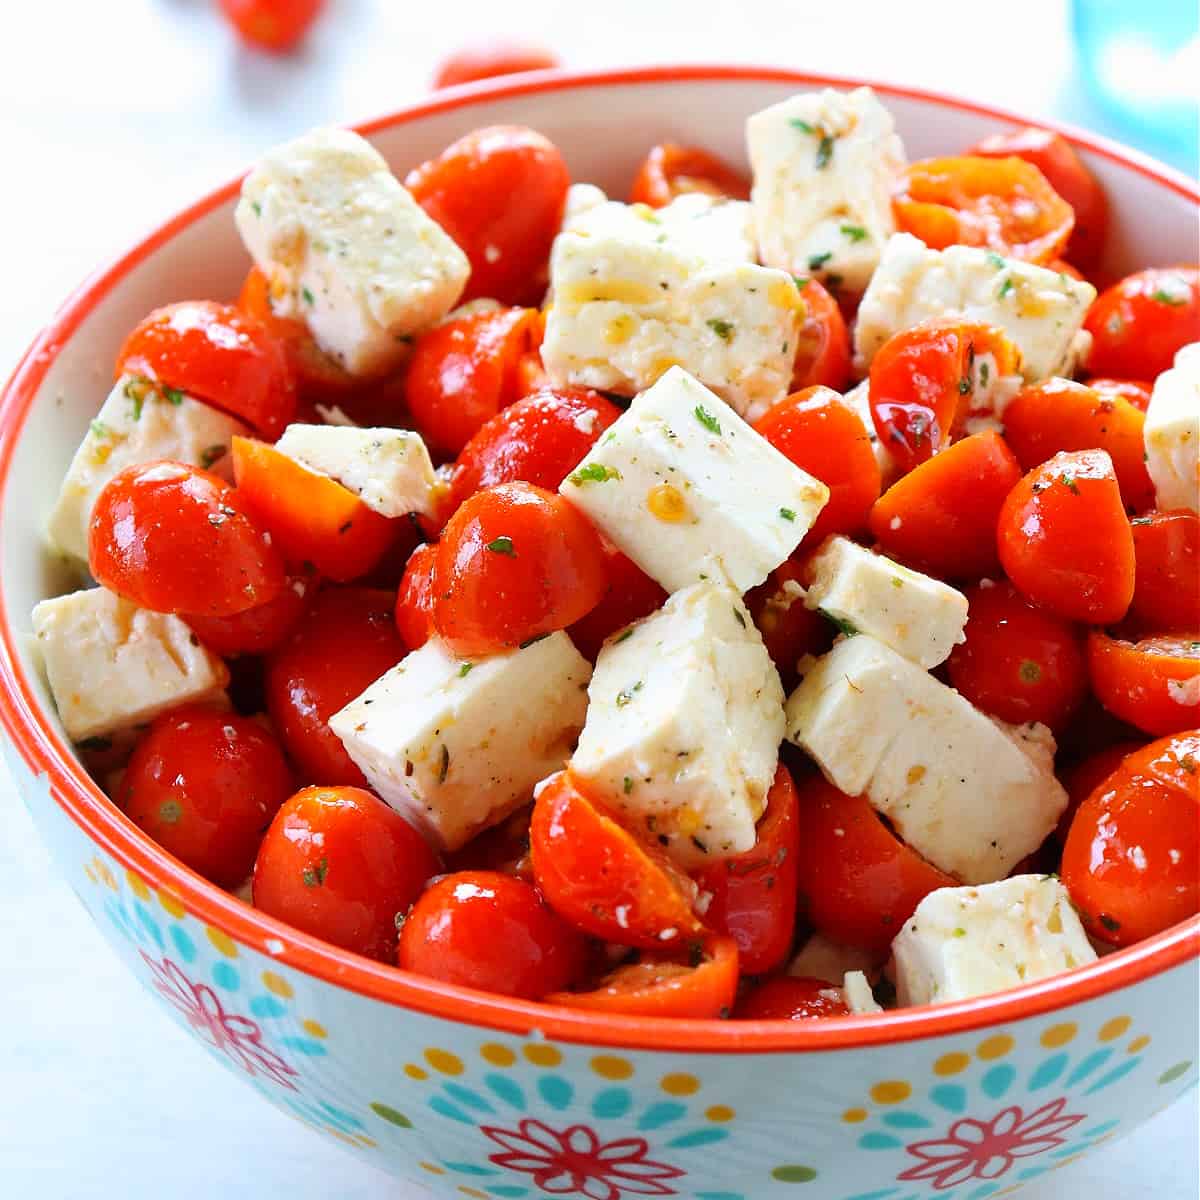 Salad with tomatoes and feta in a bowl.